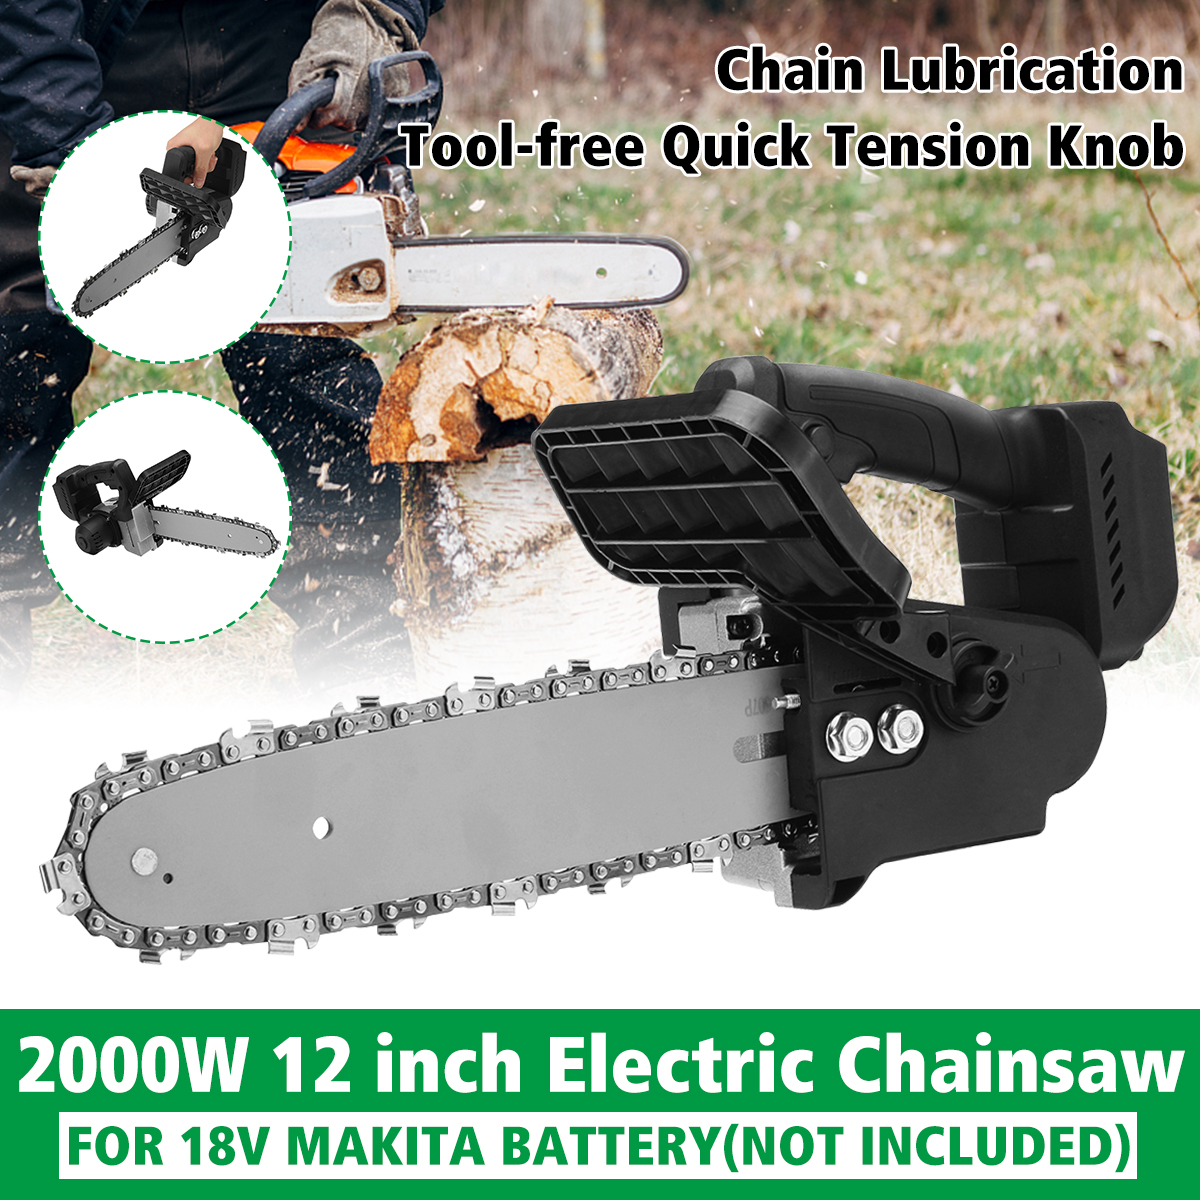 2000W-12Inch-Electric-Chainsaw-Wood-Cutter-Woodworking-Chain-Saw-for-Makita-18V-Battery-1823404-1